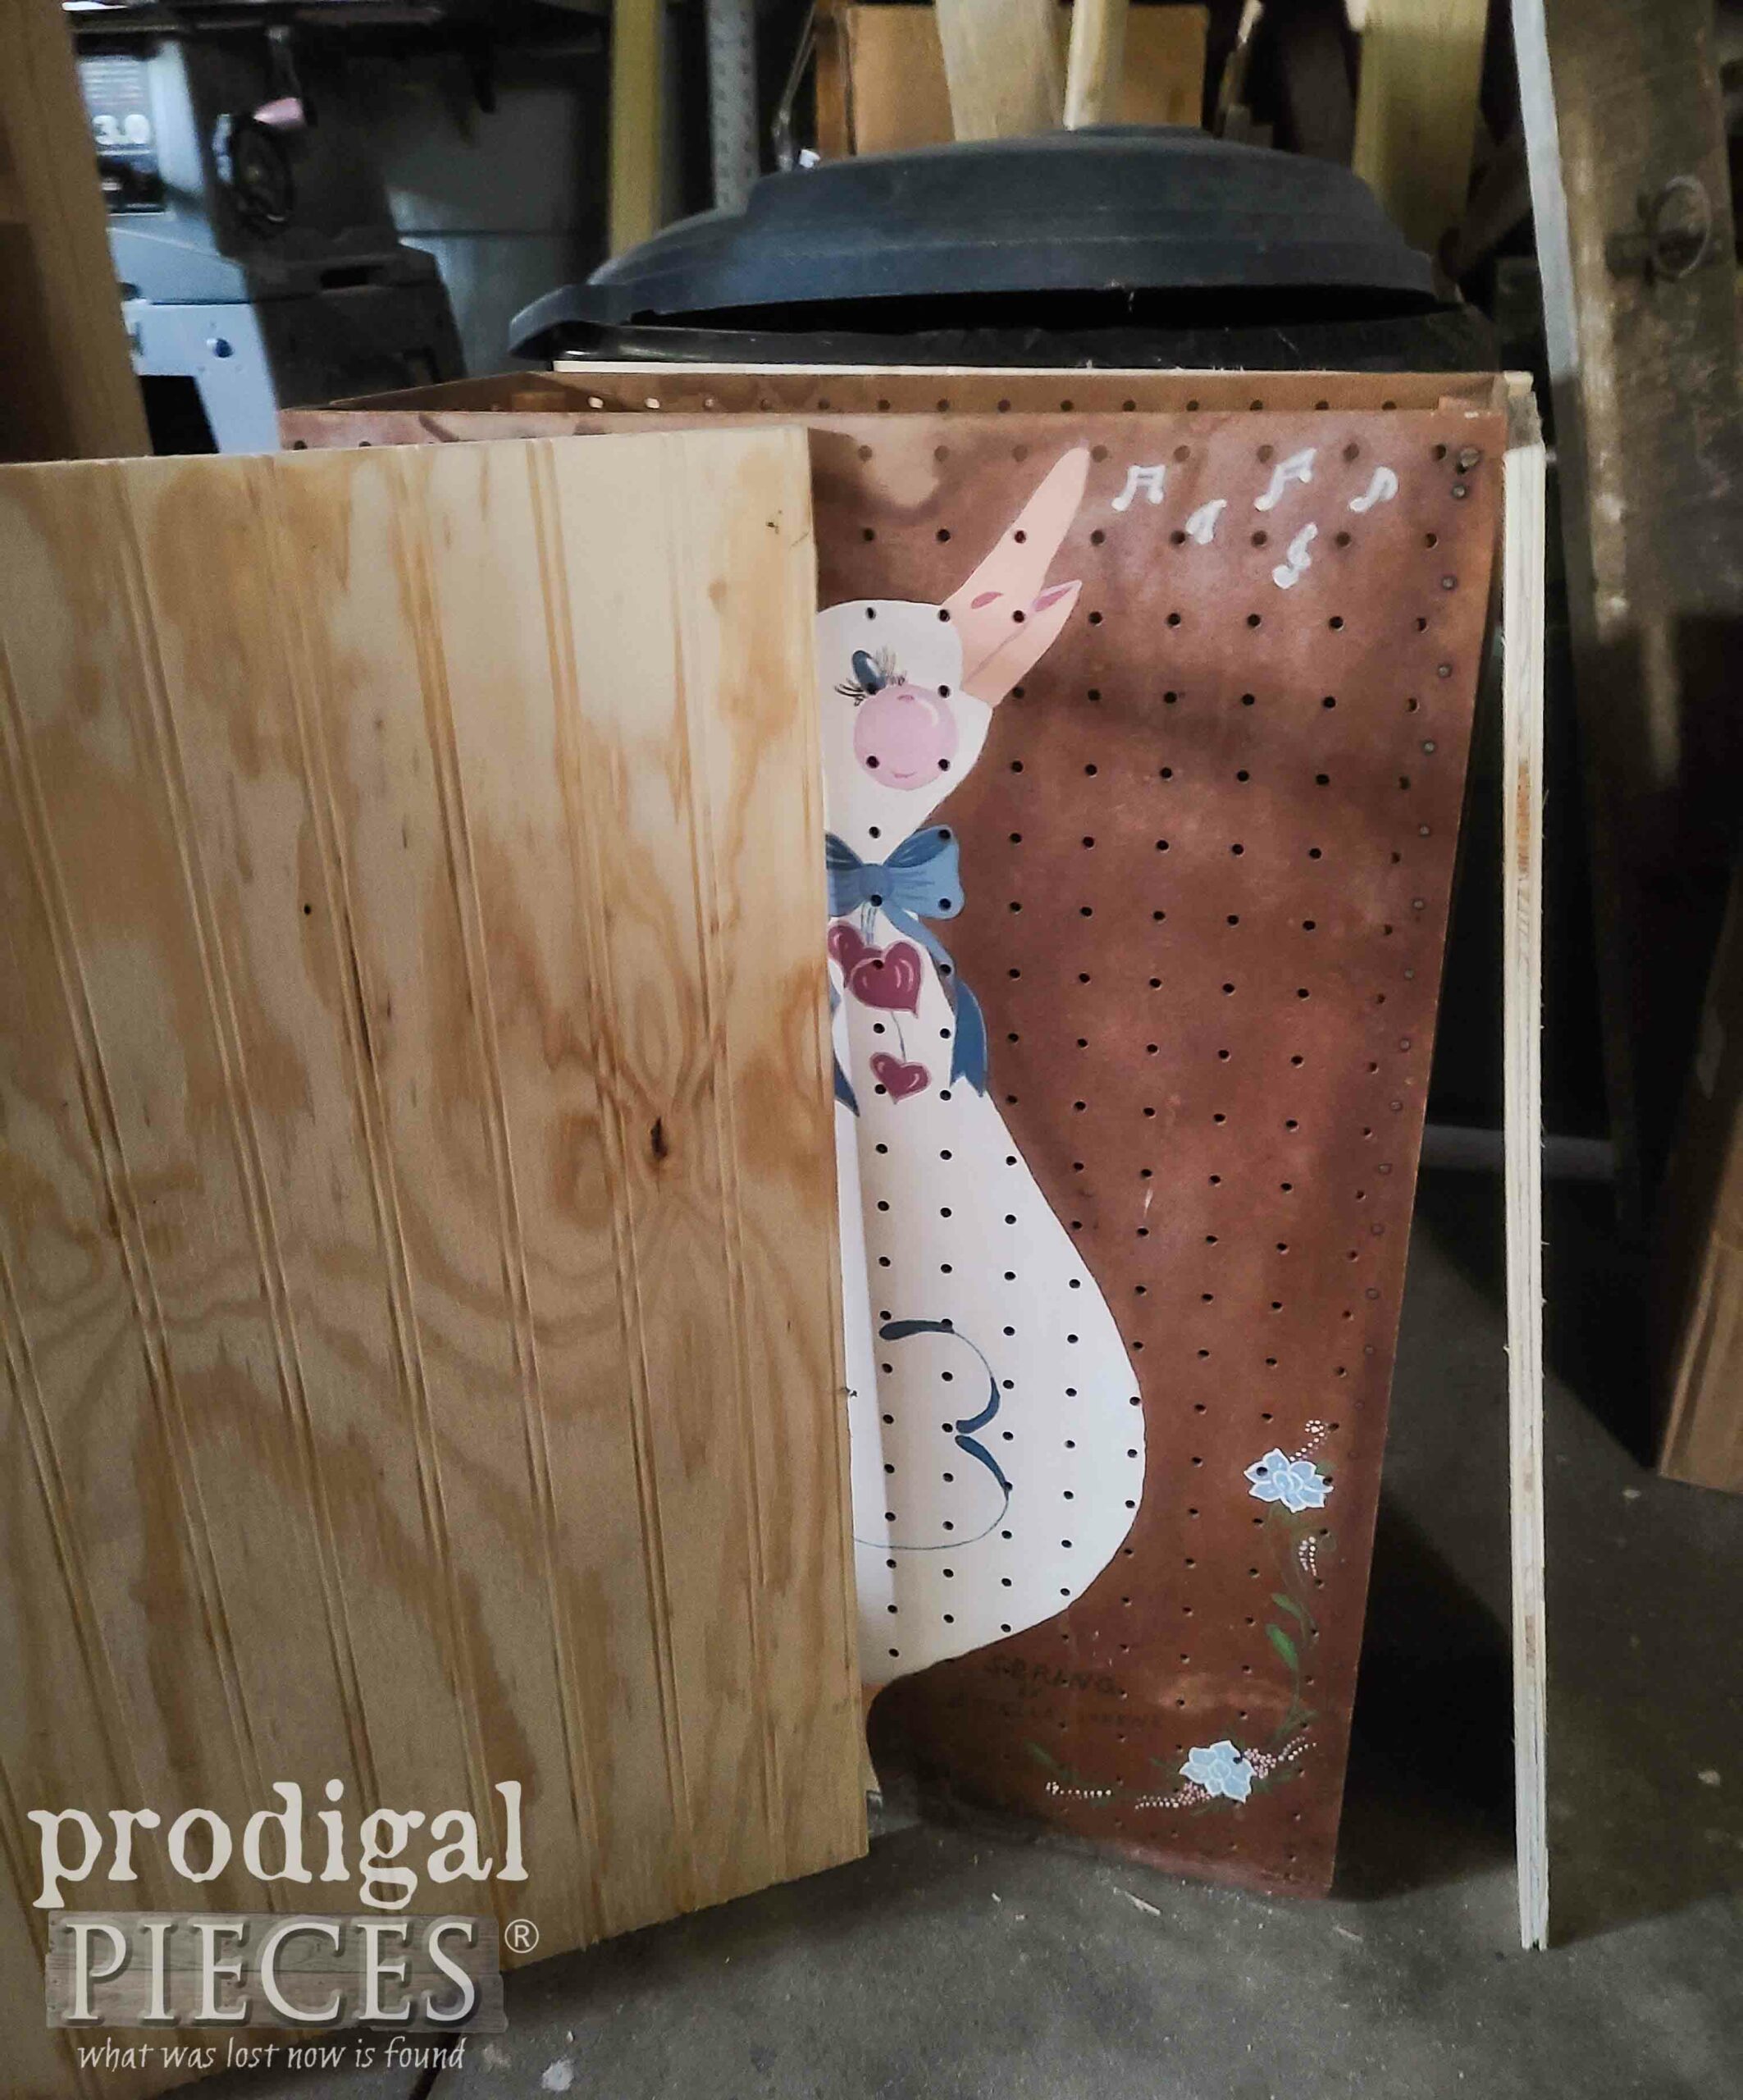 Covering 80's Goose Laundry Hamper with Beadboard | prodigalpieces.com #prodigalpieces